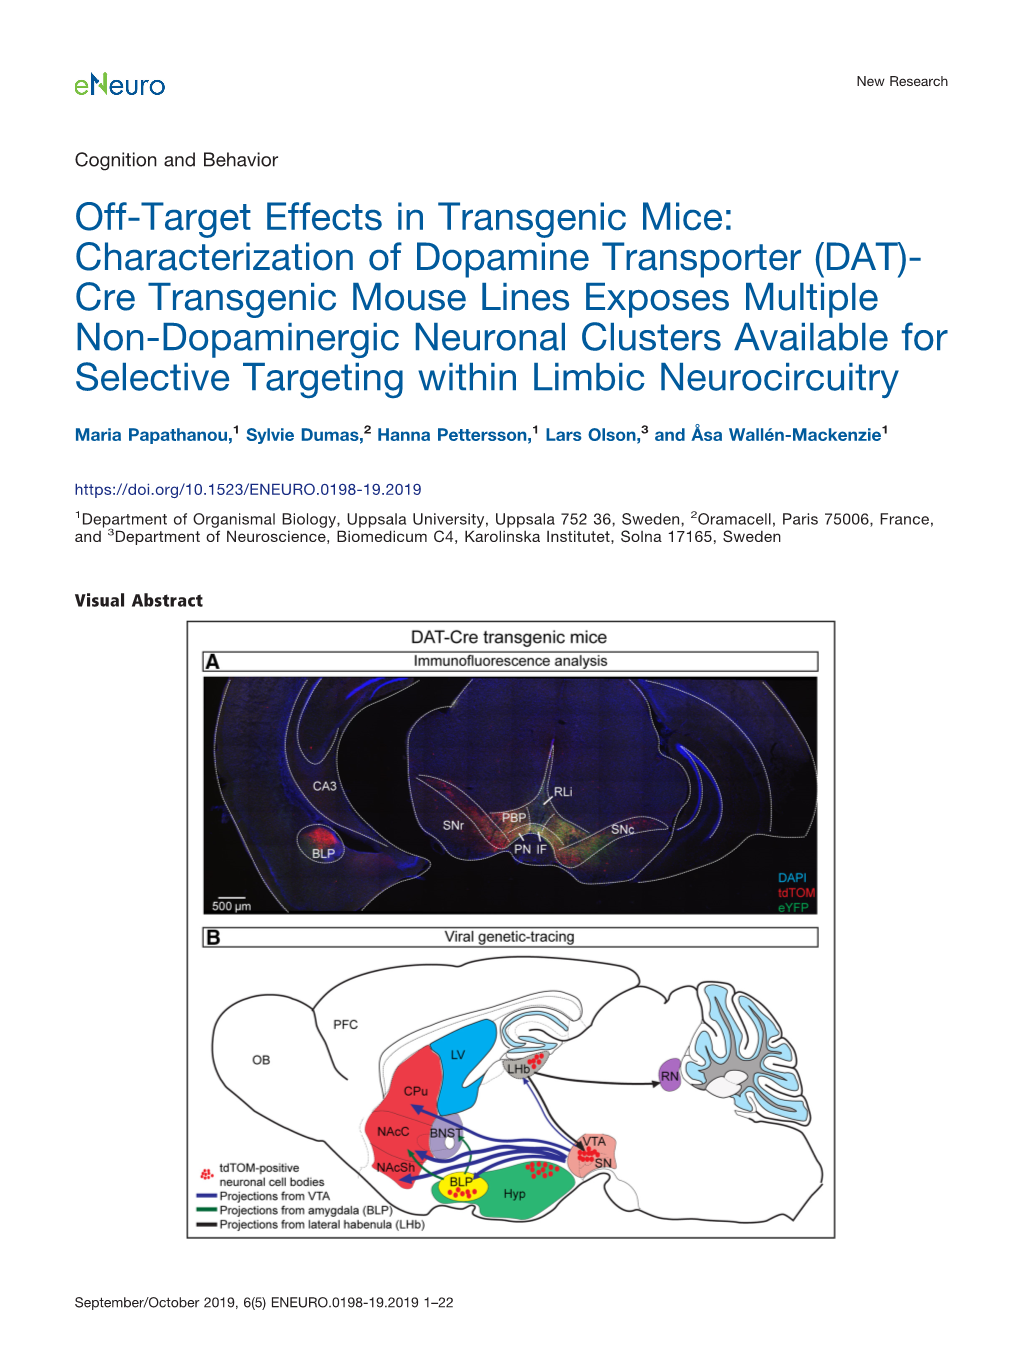 (DAT)-Cre Transgenic Mouse Lines Exposes Multipl